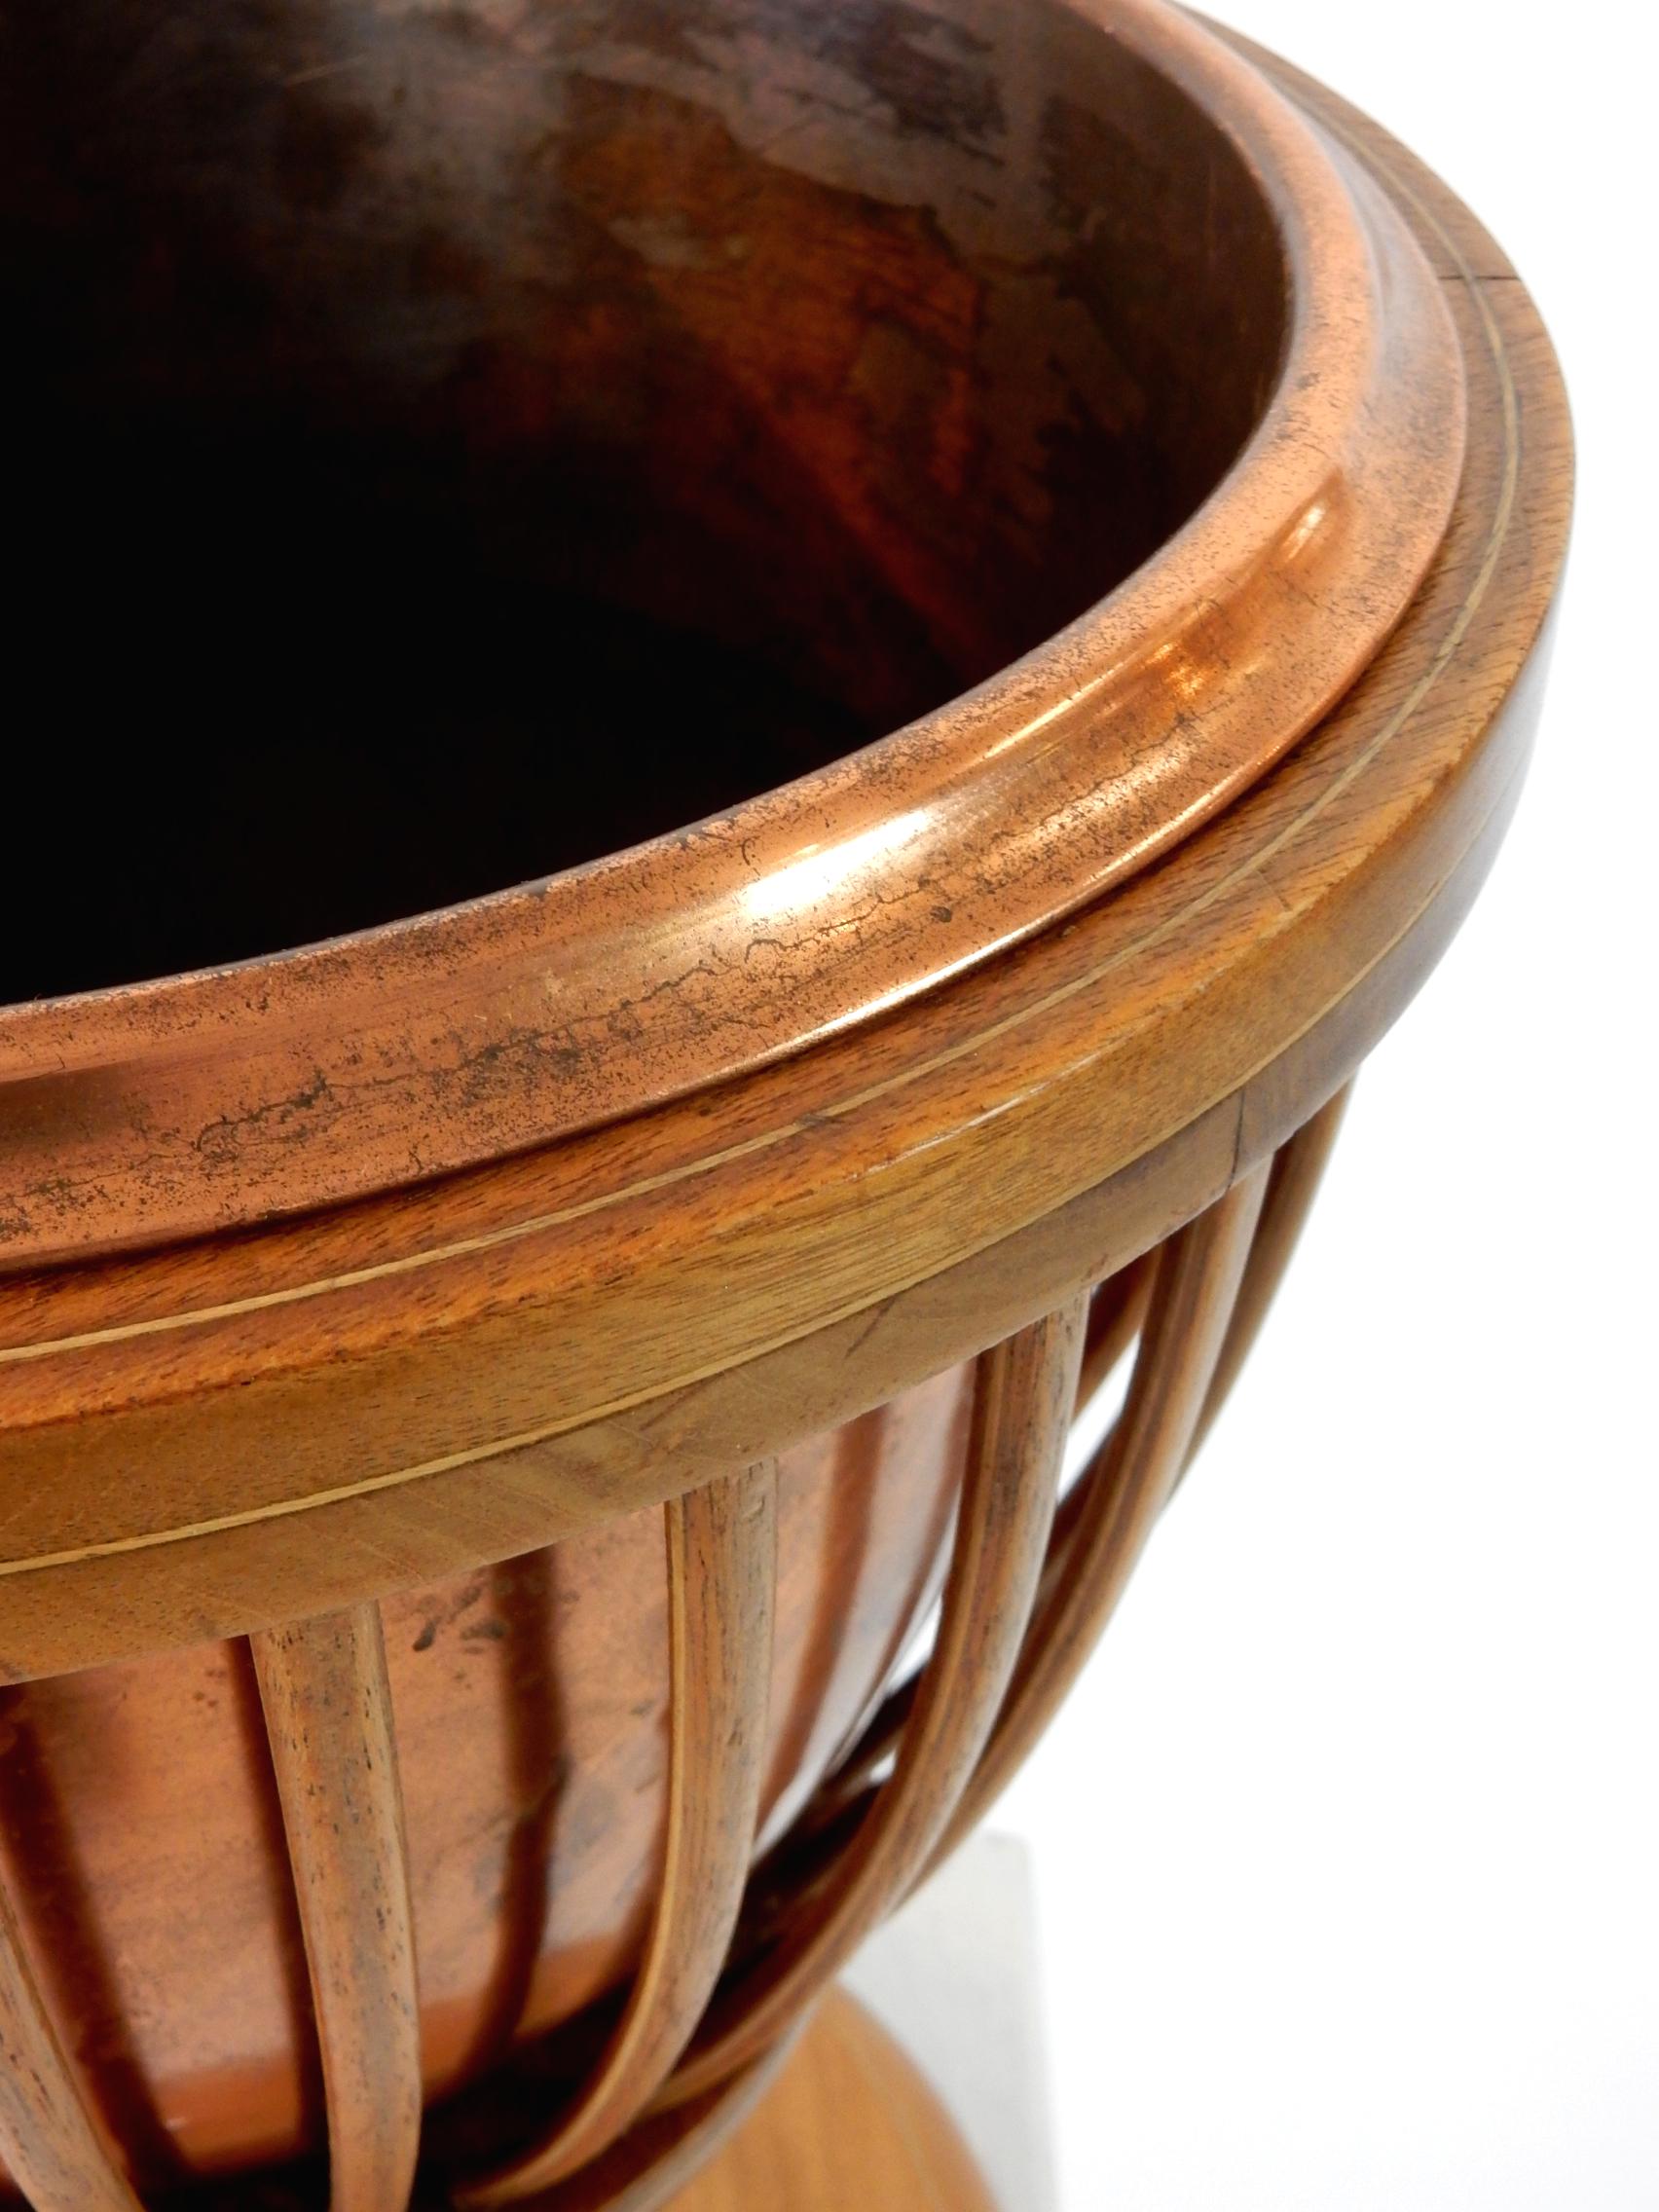 19th Century Slatted Inlaid Mahogany and Copper Jardinièr Planter For Sale 1